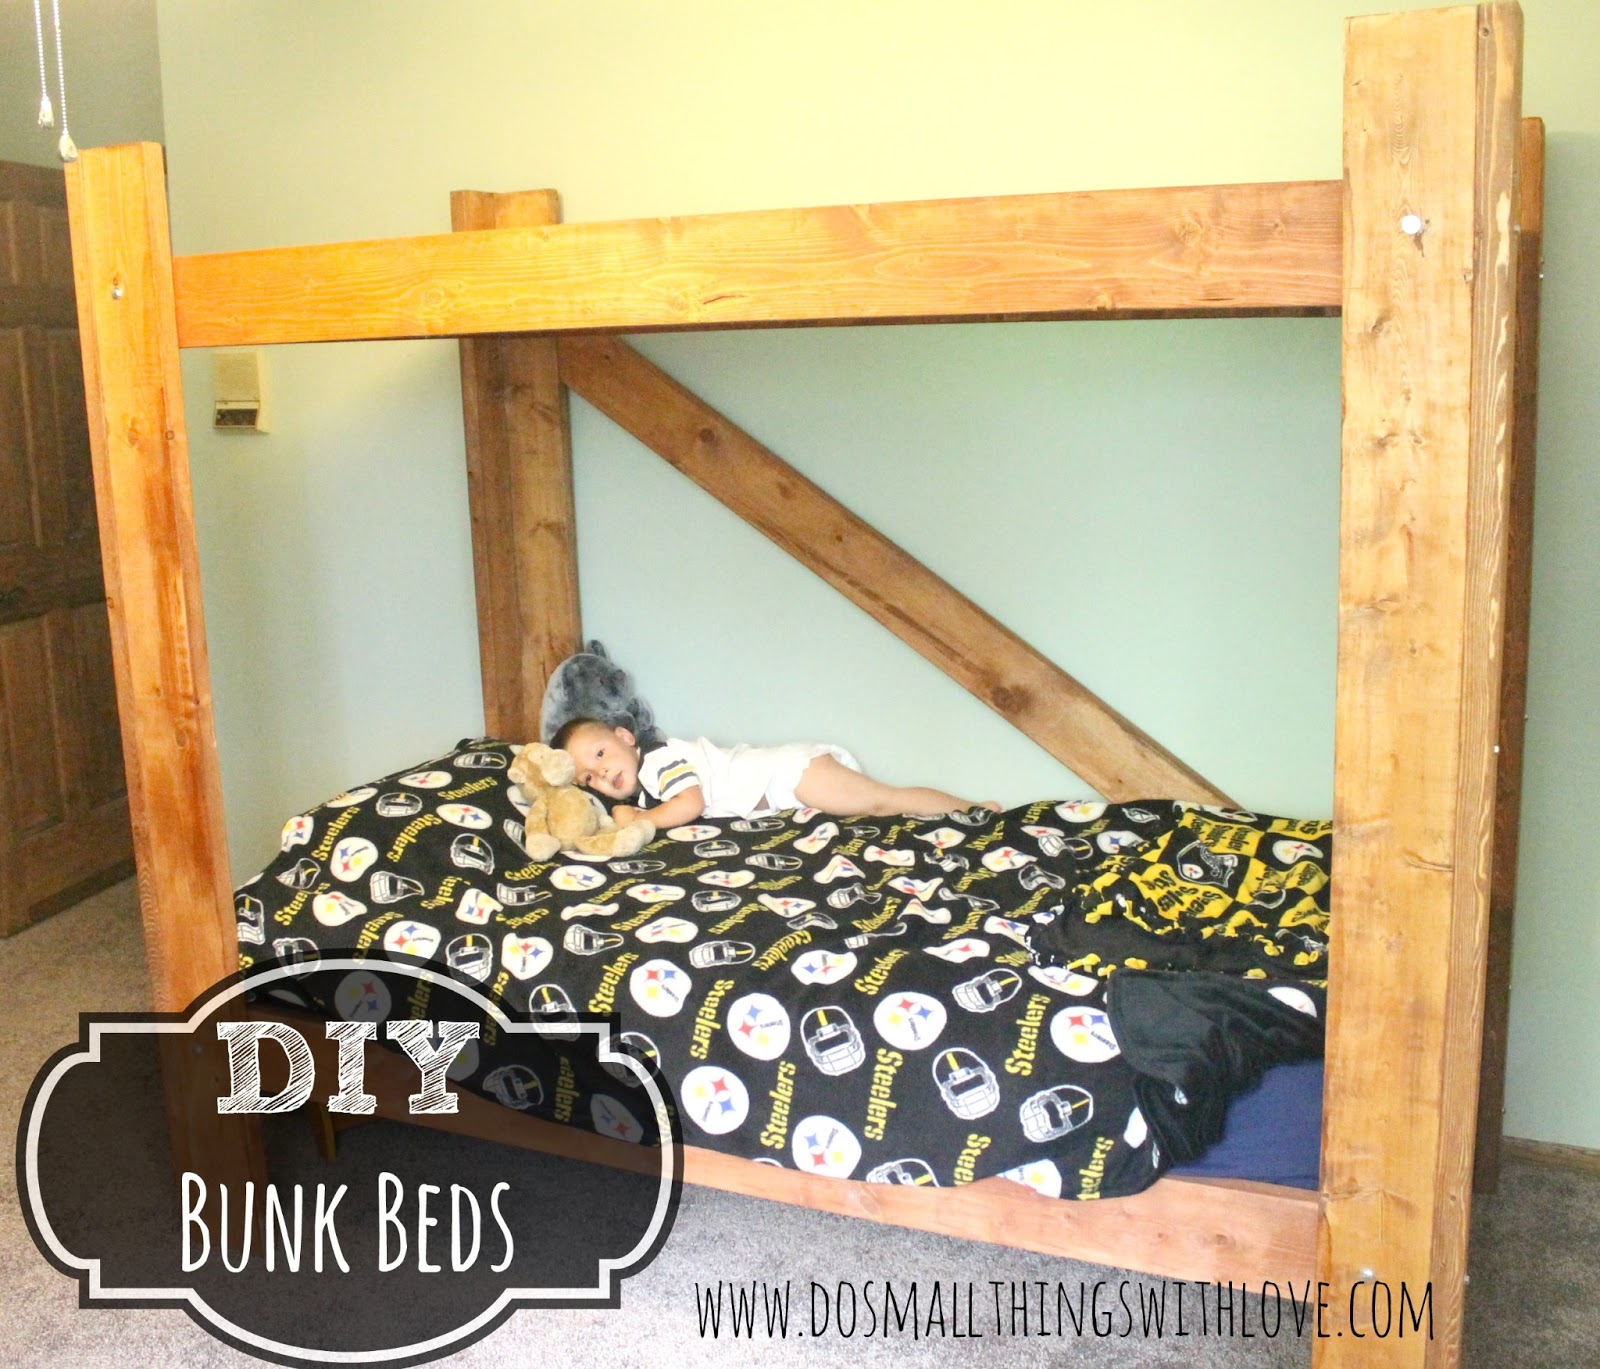 DIY Bunk Beds – Do Small Things with Great Love